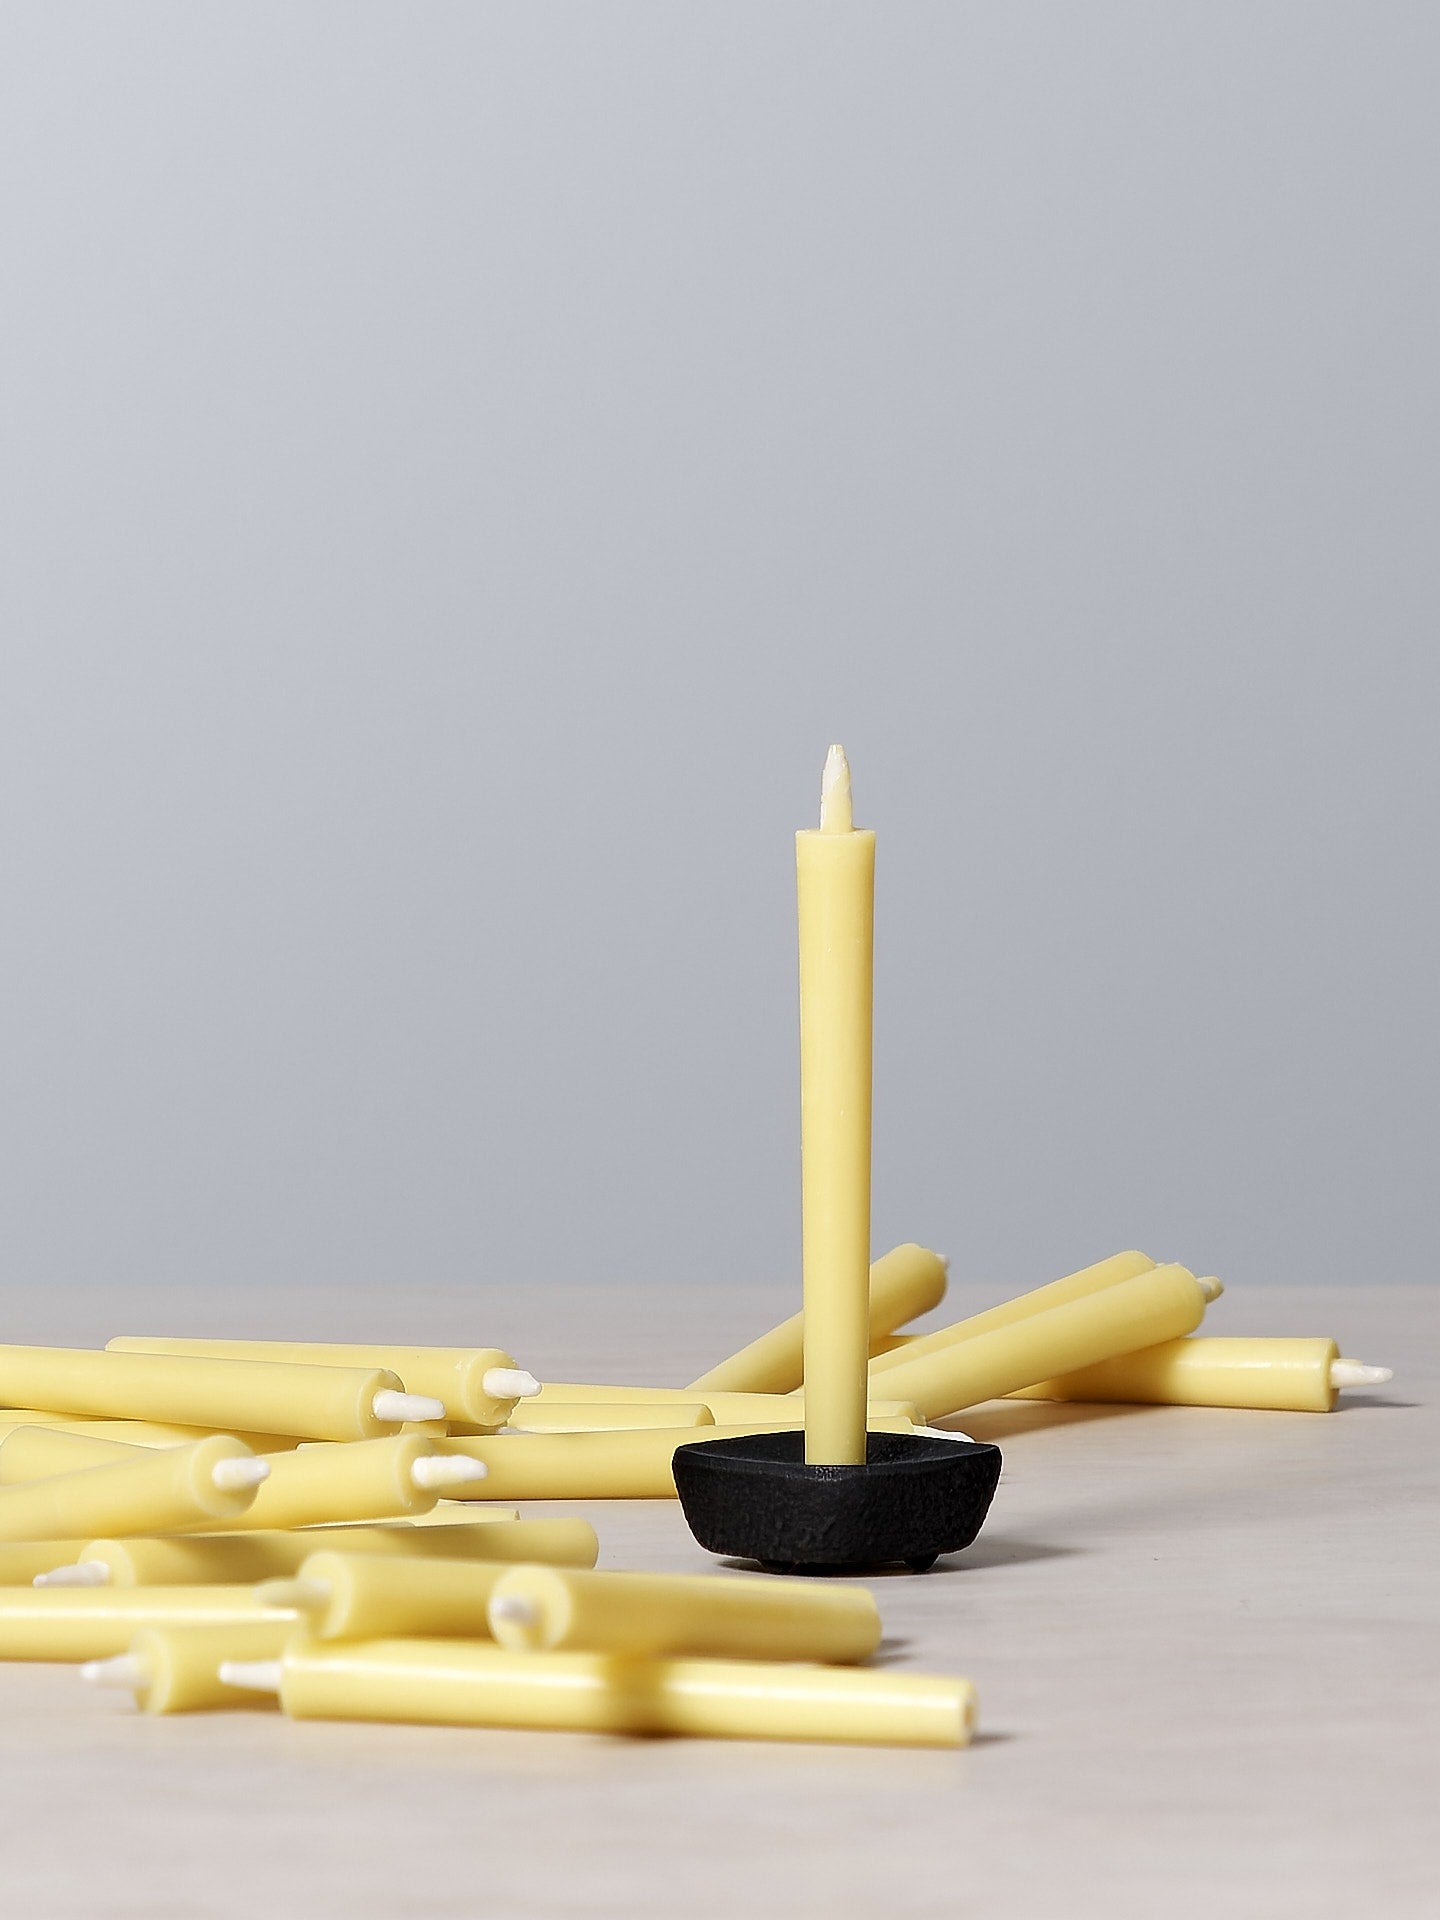 A cluster of yellow Takazawa Nanohana Candles (box of 24), also known as rapeseed flowers, elegantly arranged on a table.